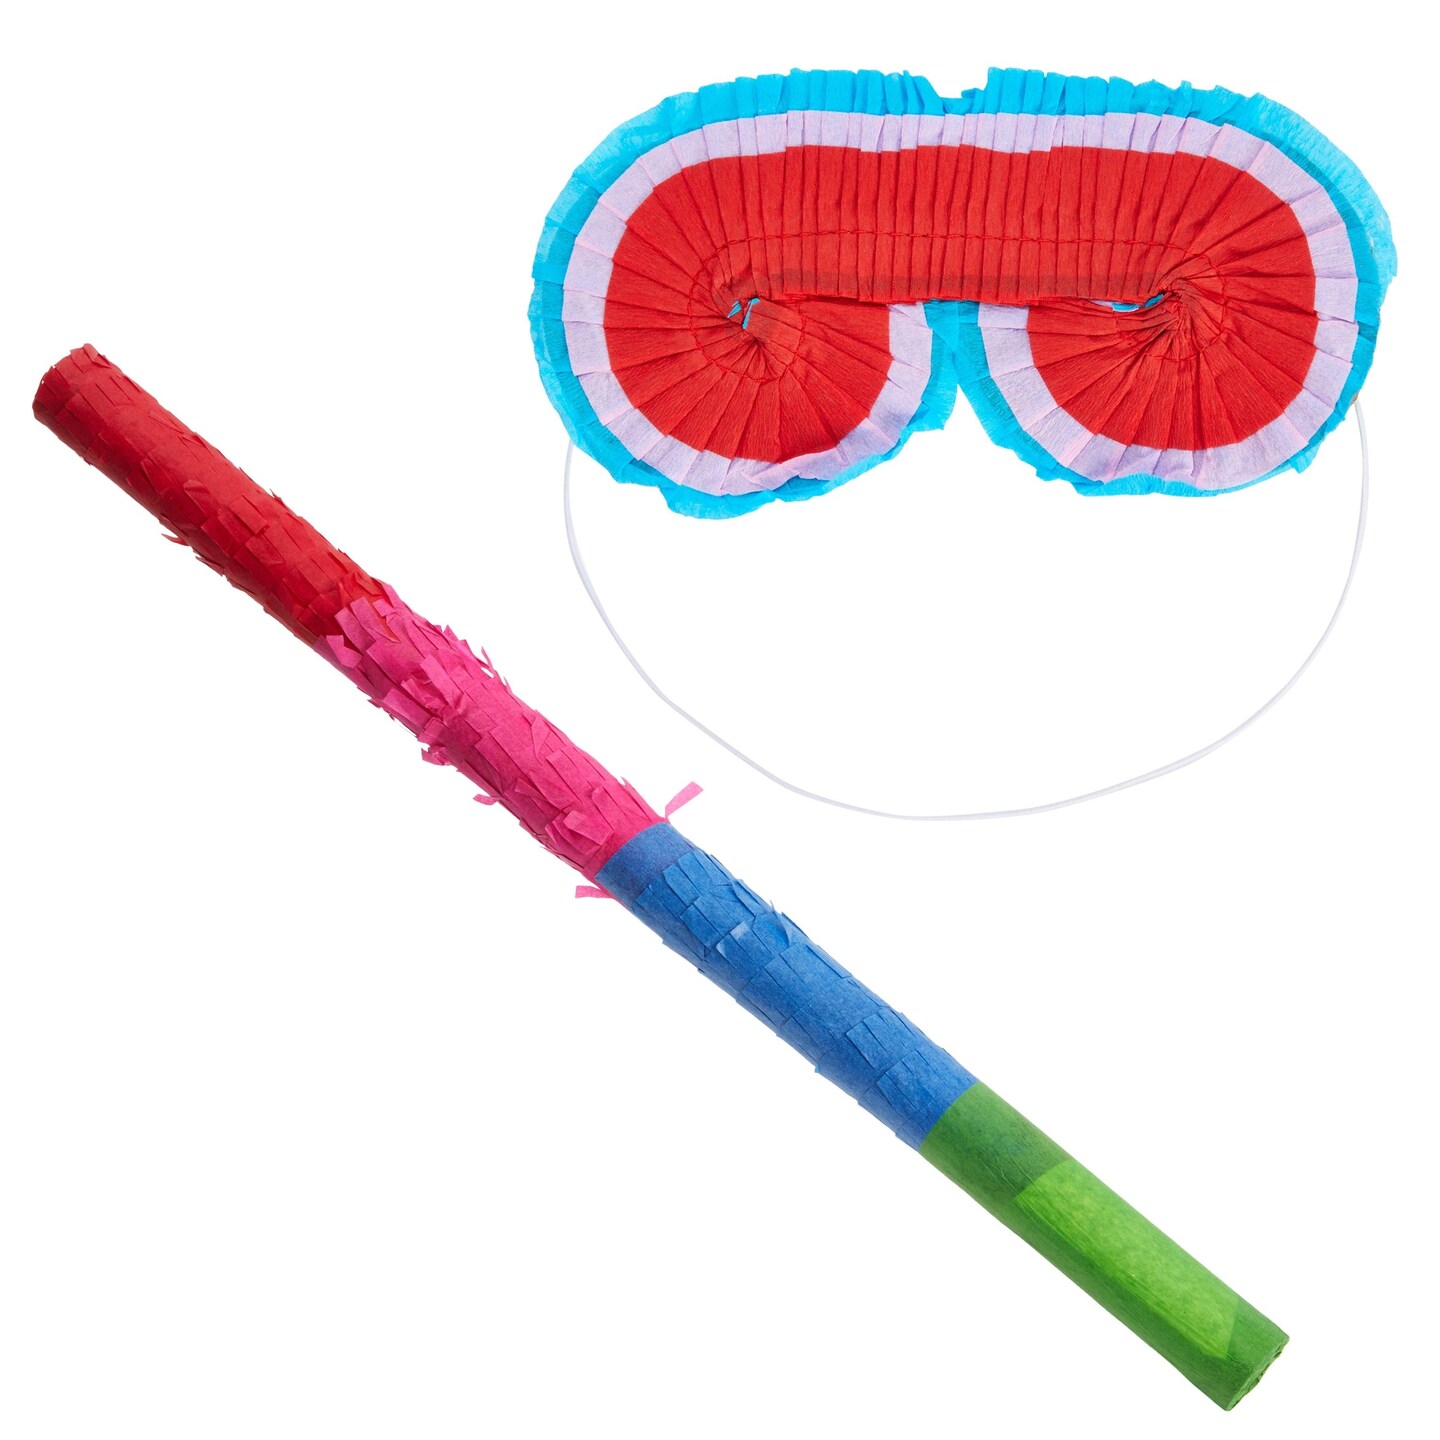 Small Pinata Stick and Blindfold for Kids Birthday, Cinco de Mayo Party Decorations (2-Piece Set)